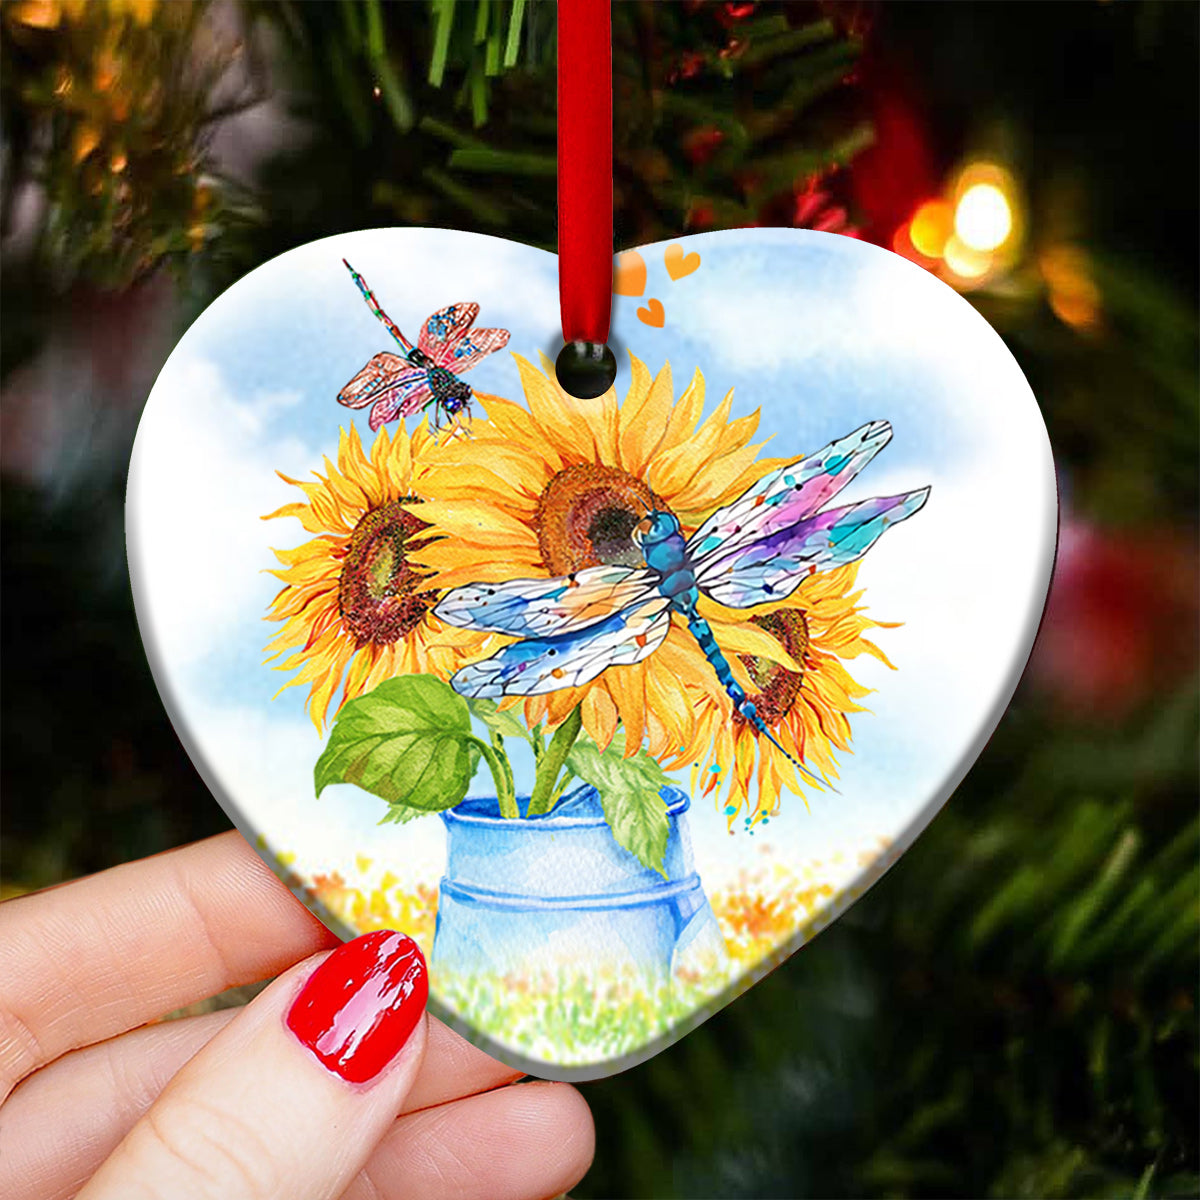 Dragonfly Advice Live In The Moment laugh Often Love Unconditionally - Heart Ornament - Owls Matrix LTD